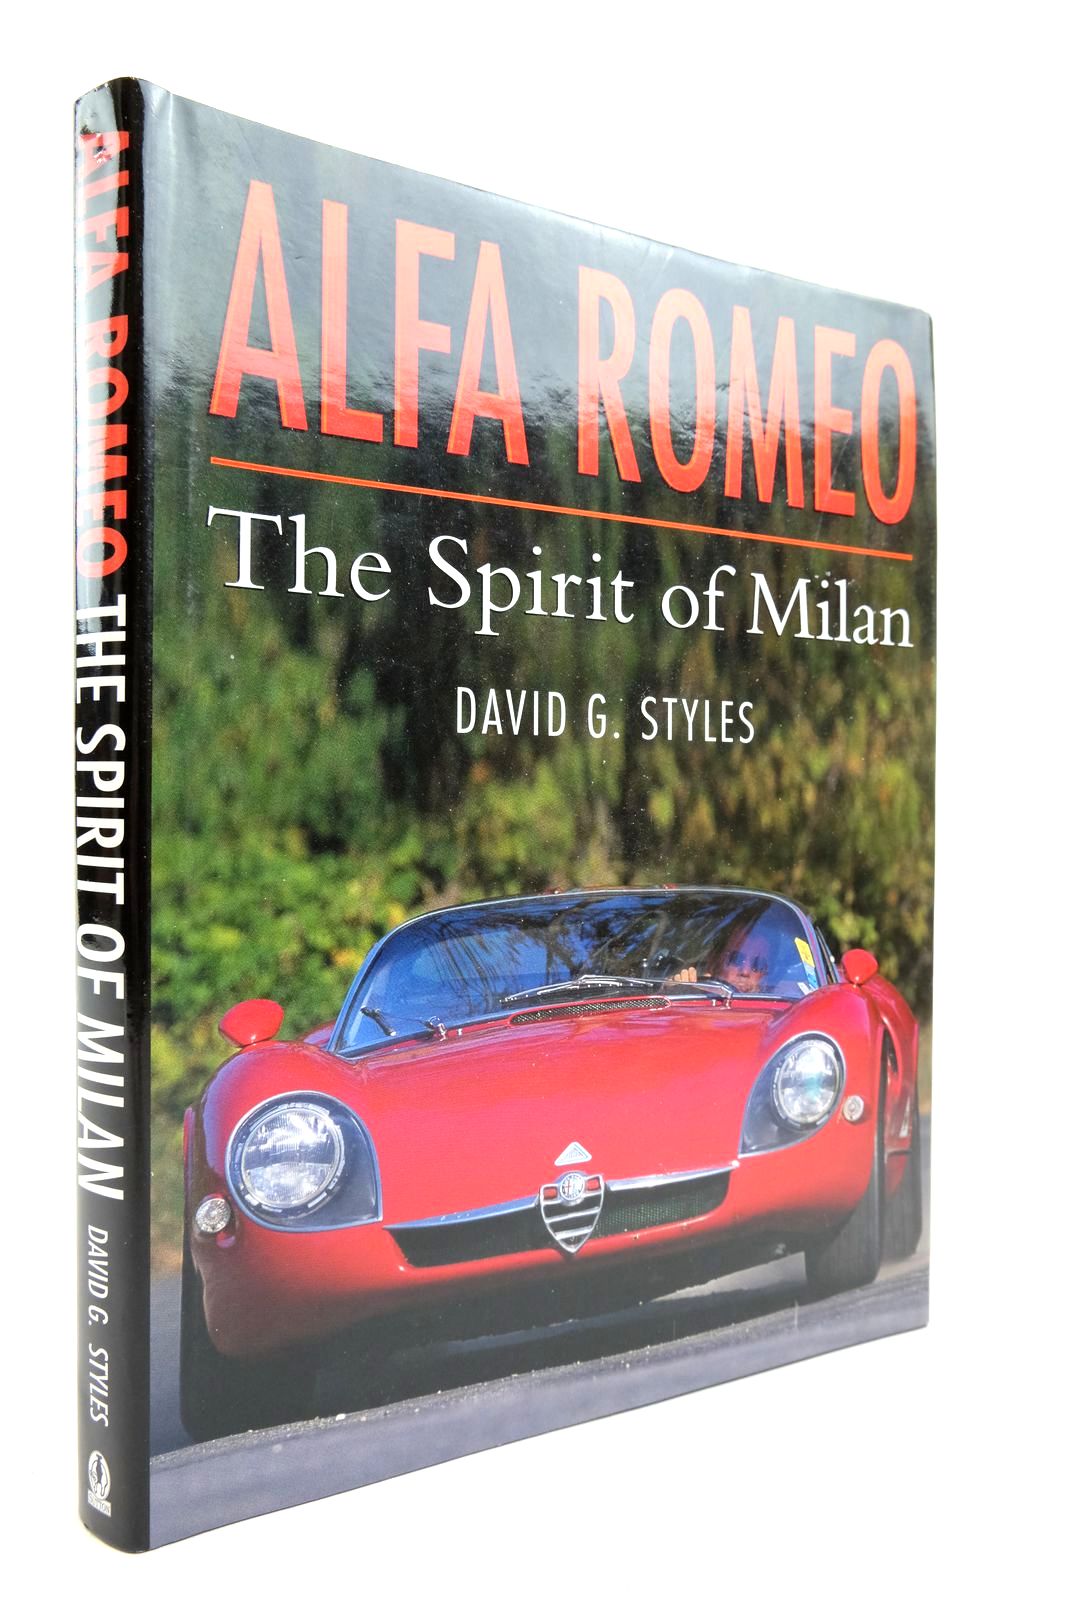 Photo of ALFA ROMEO: THE SPIRIT OF MILAN written by Styles, David G. published by Sutton Publishing (STOCK CODE: 2139388)  for sale by Stella & Rose's Books